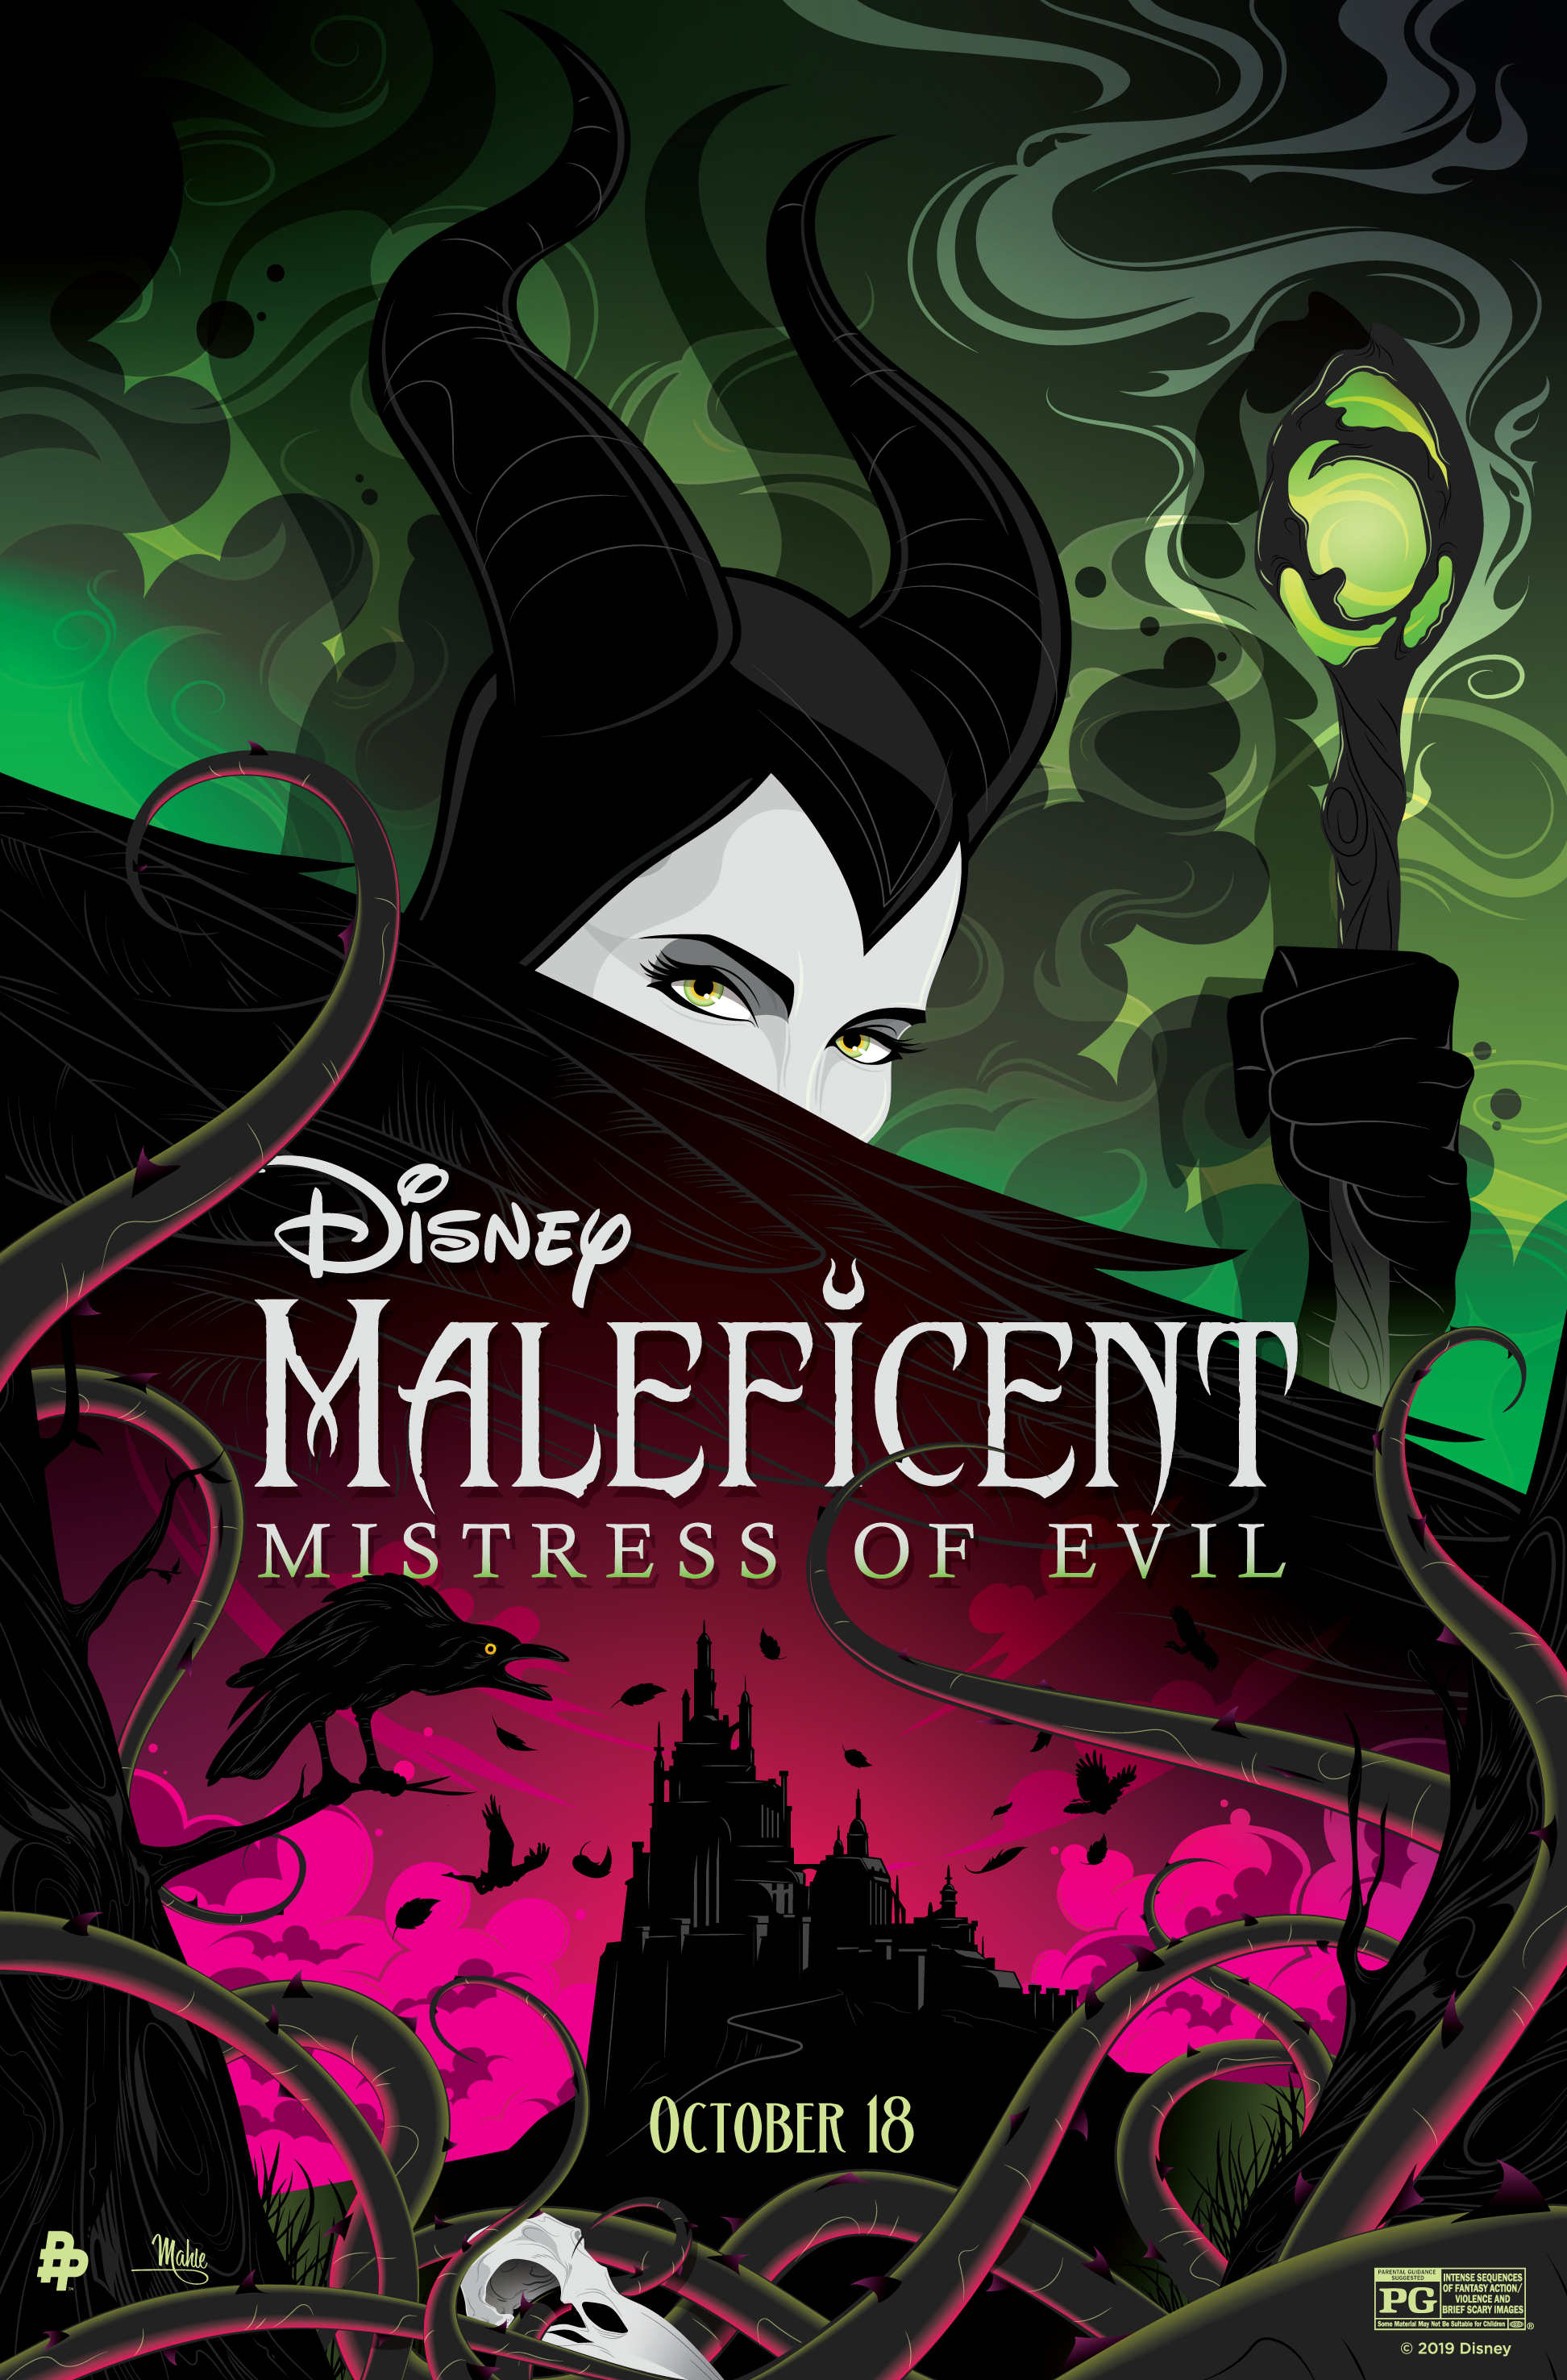 Artwork by Maleficent: Mistress of Evil